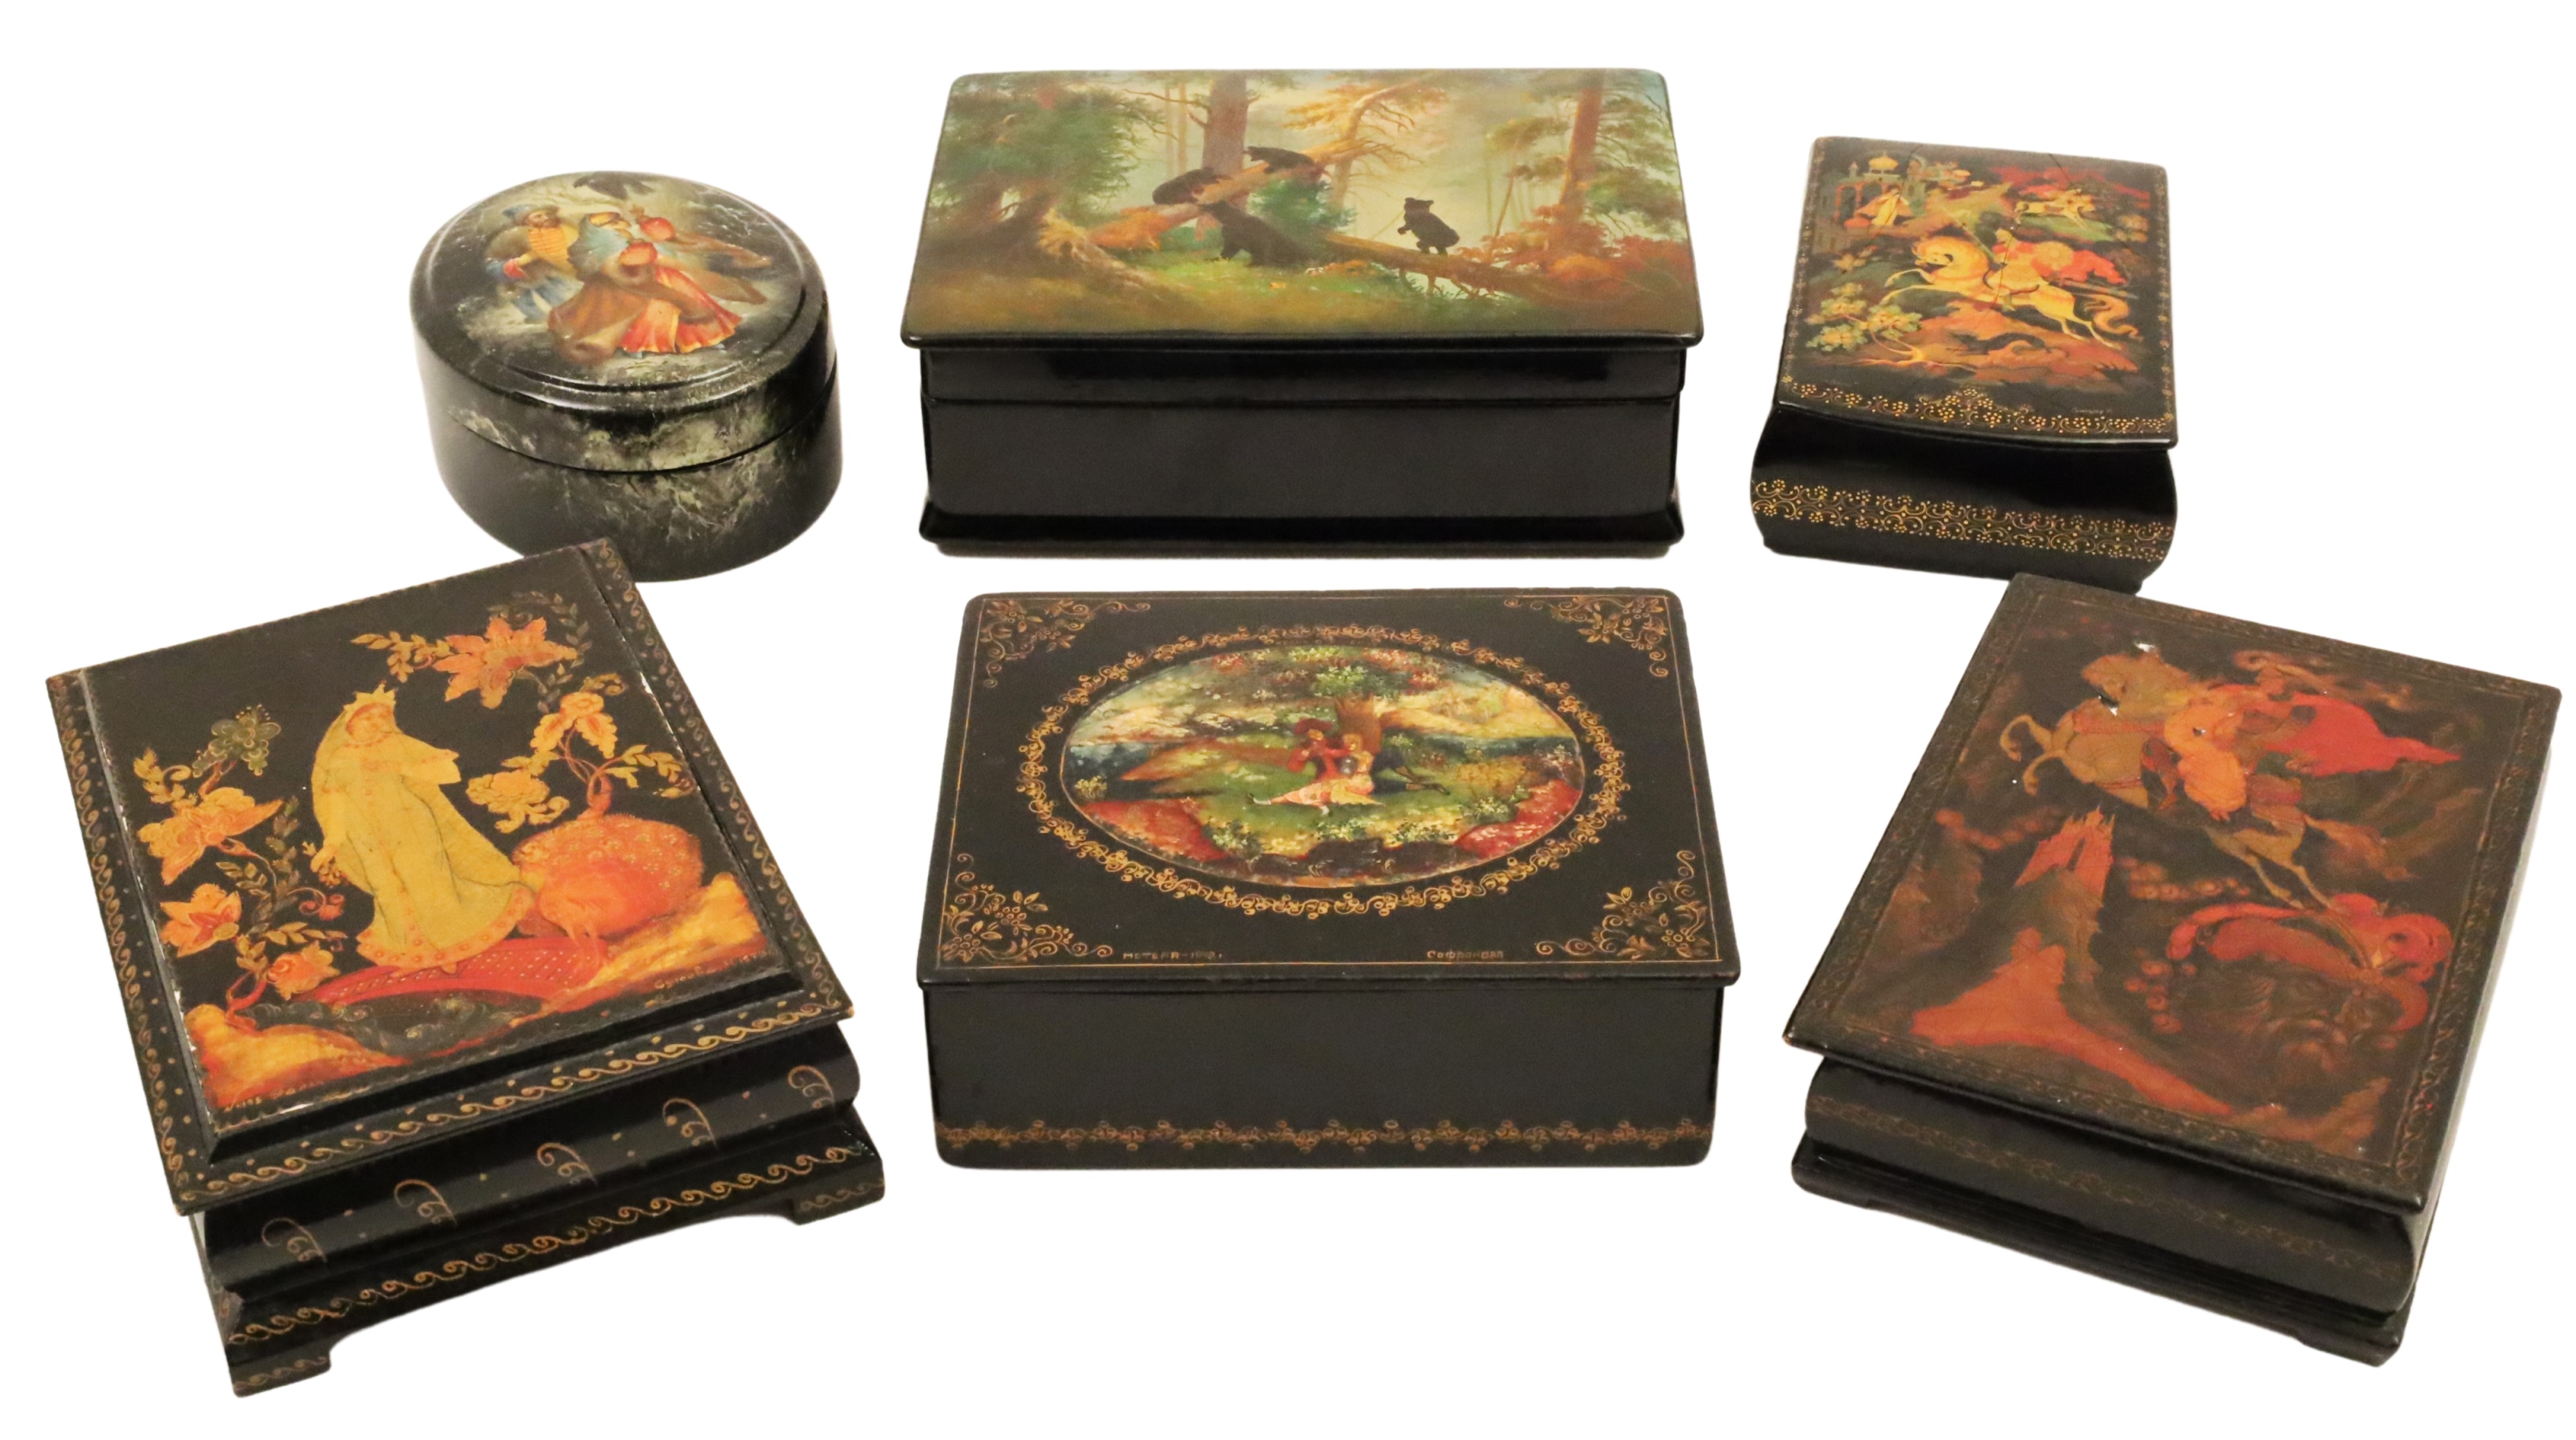 GROUP OF 6 RUSSIAN LACQUER BOXES